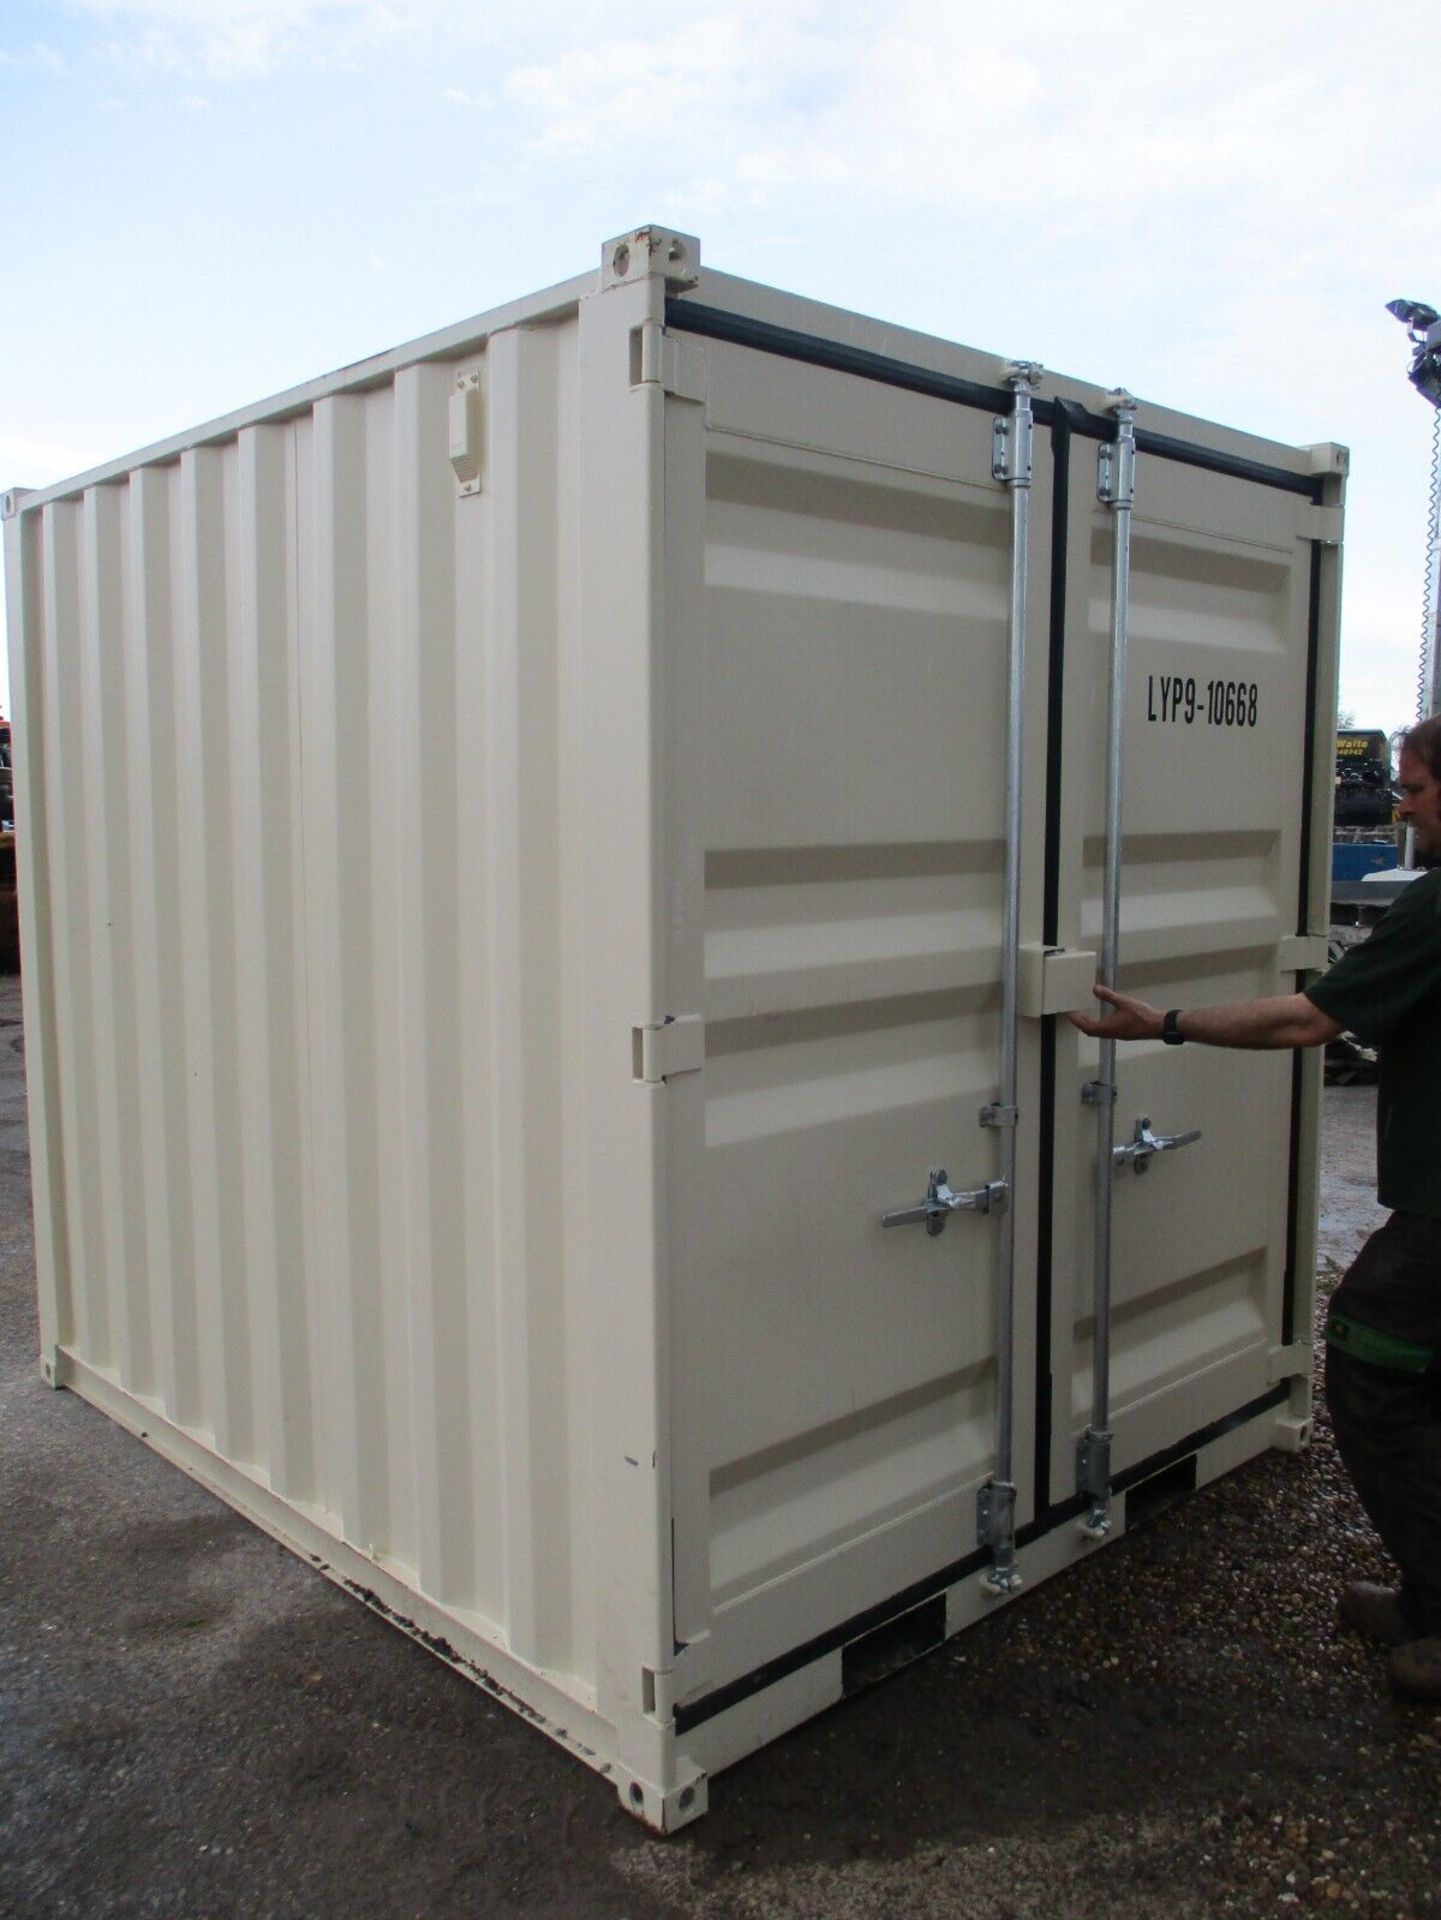 NEW 9 FOOT SECURE SHIPPING CONTAINER 10 HOME OFFICE GARDEN ROOM GARAGE SHED - Image 4 of 7